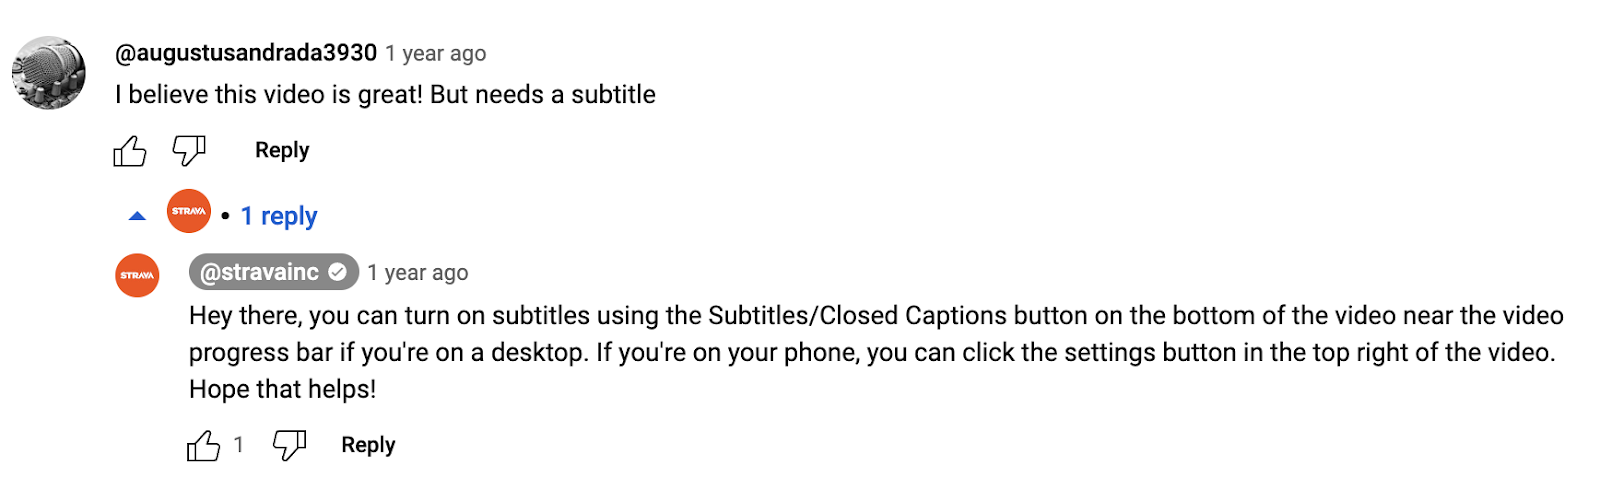 An example of Strava answering to an user asking about YouTube video subtitles under the company's video